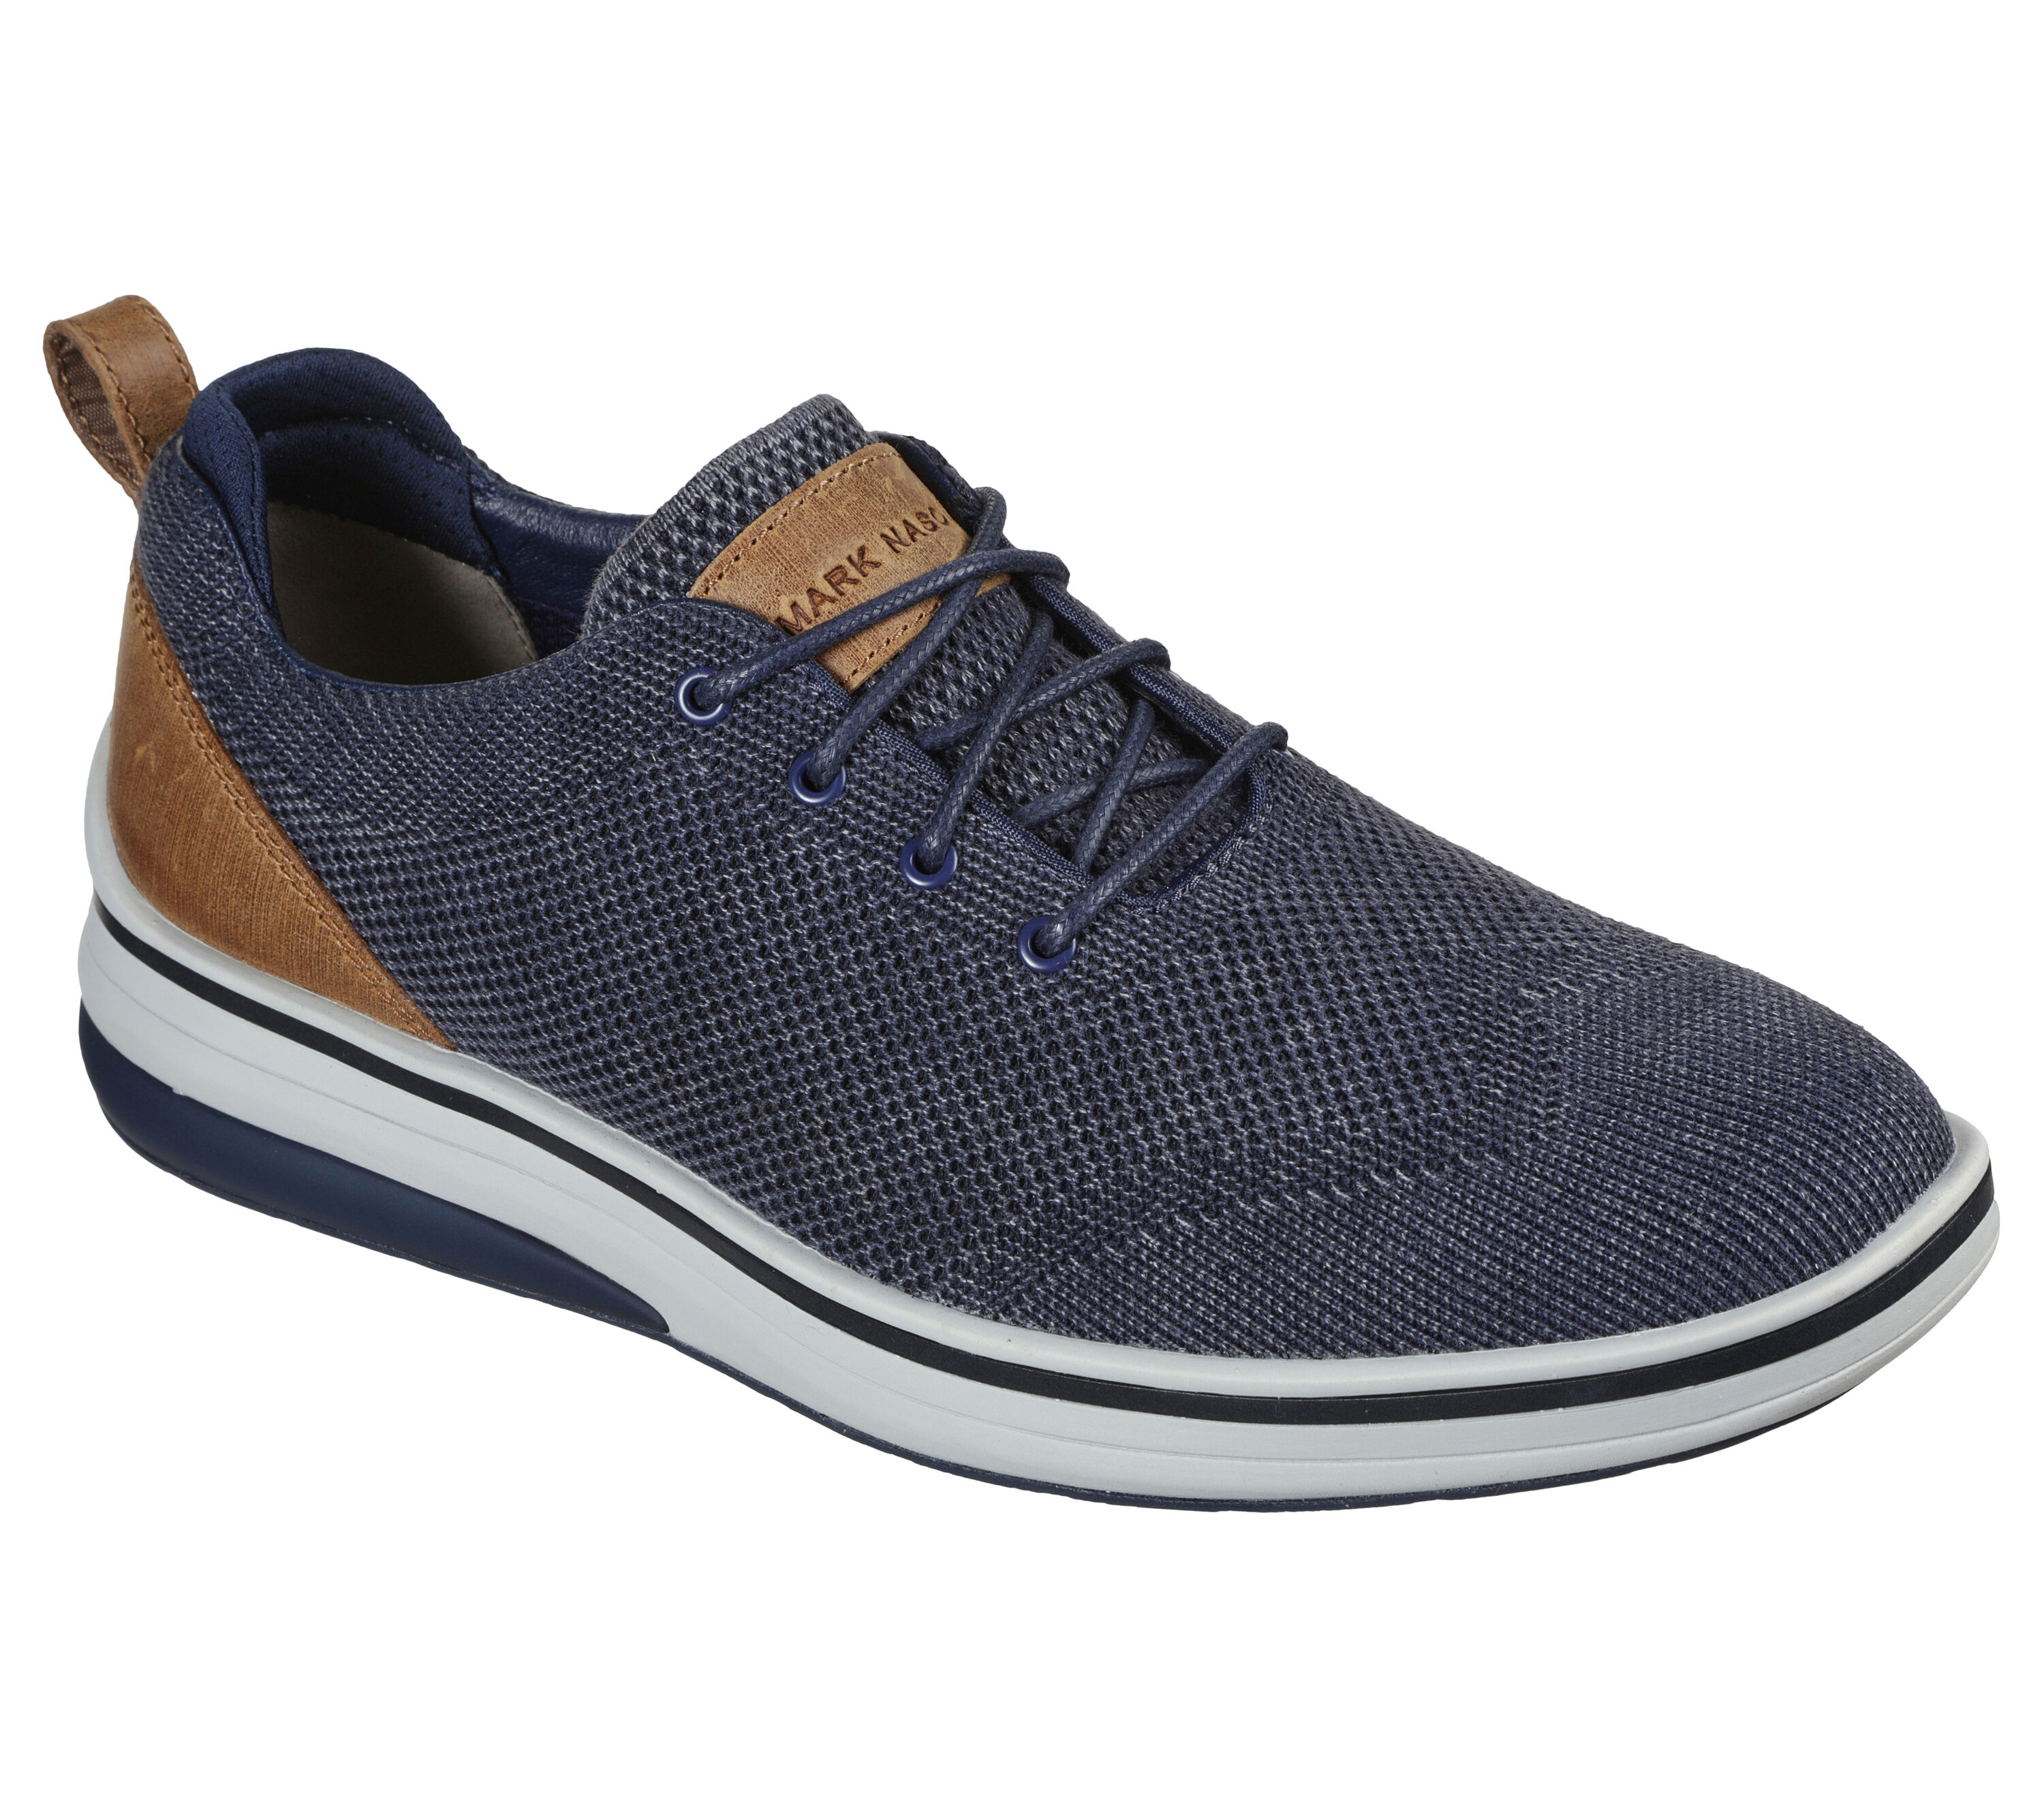 Shop the Casual Cell Wrap - Robinson | SKECHERS